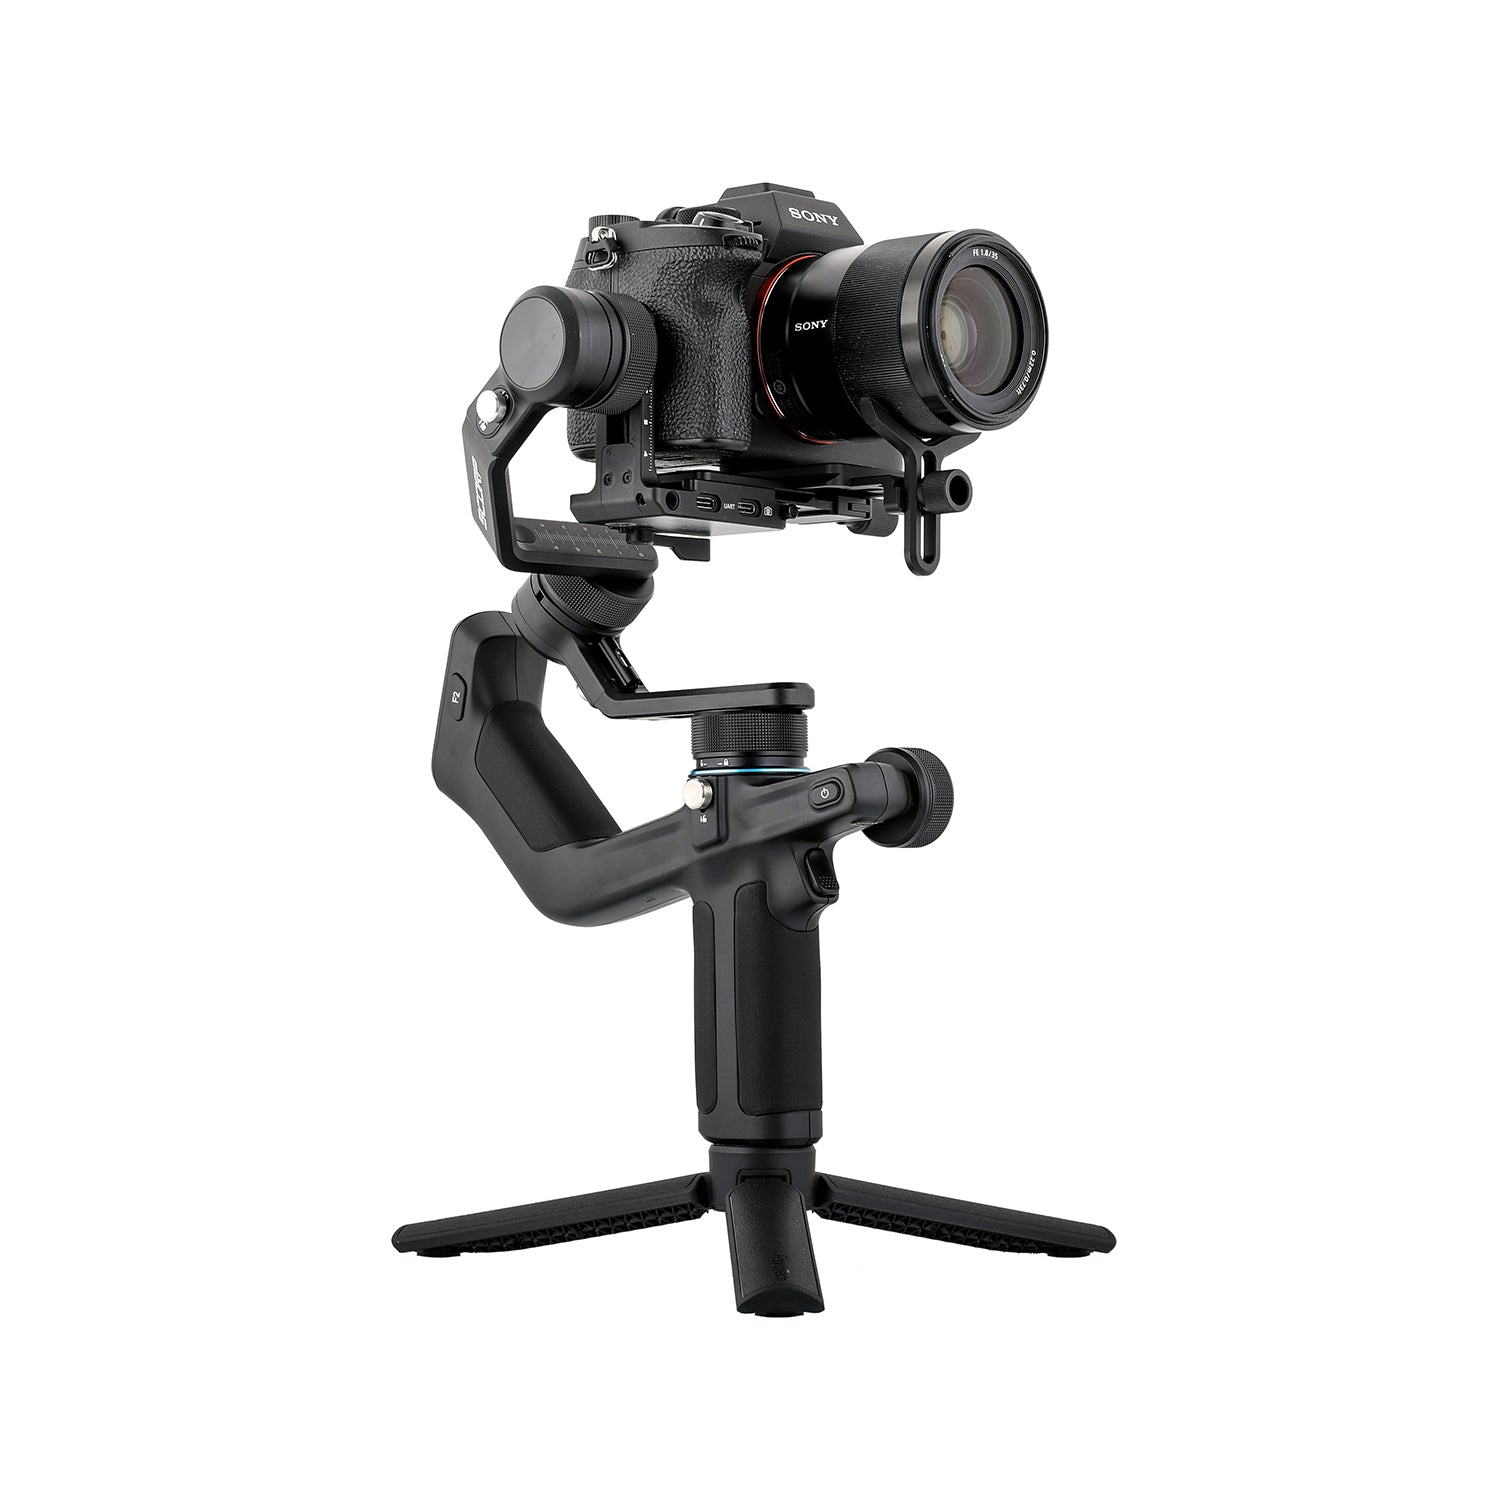 SCORP Mini 3-Axis OLED Touchscreen 4-in-1 Camera Gimbal Stabilizer